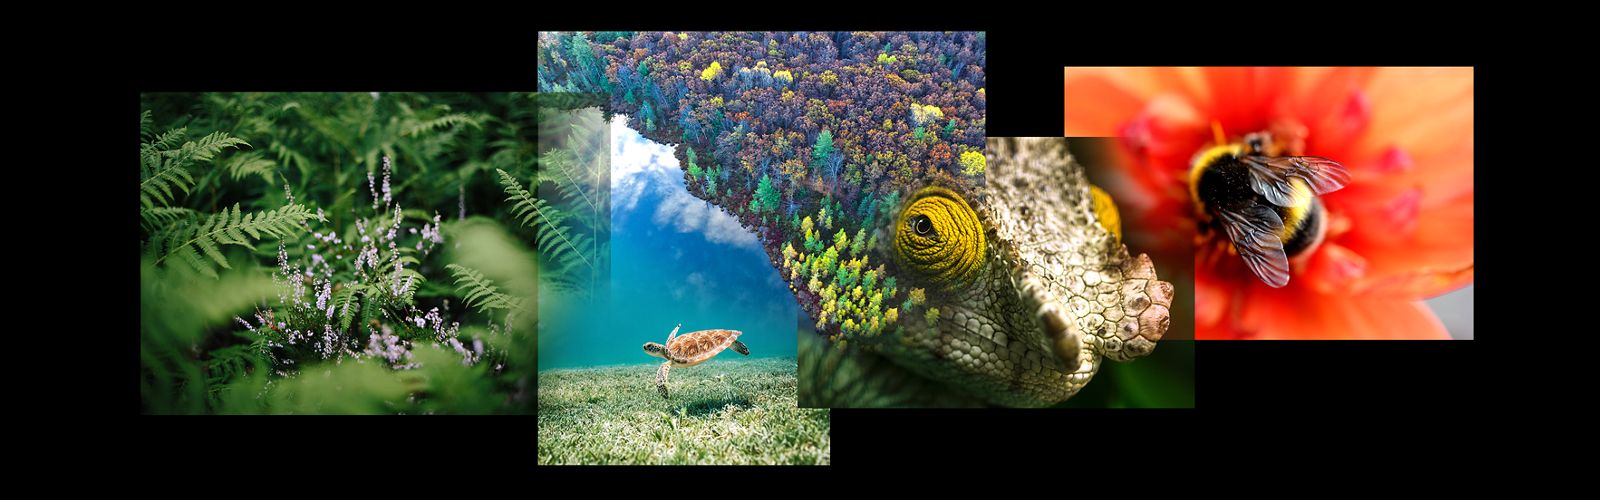 a collage of photos showing forest scenes, a sea turtle, a bumblebee, and a chameleon's eye, against a black background